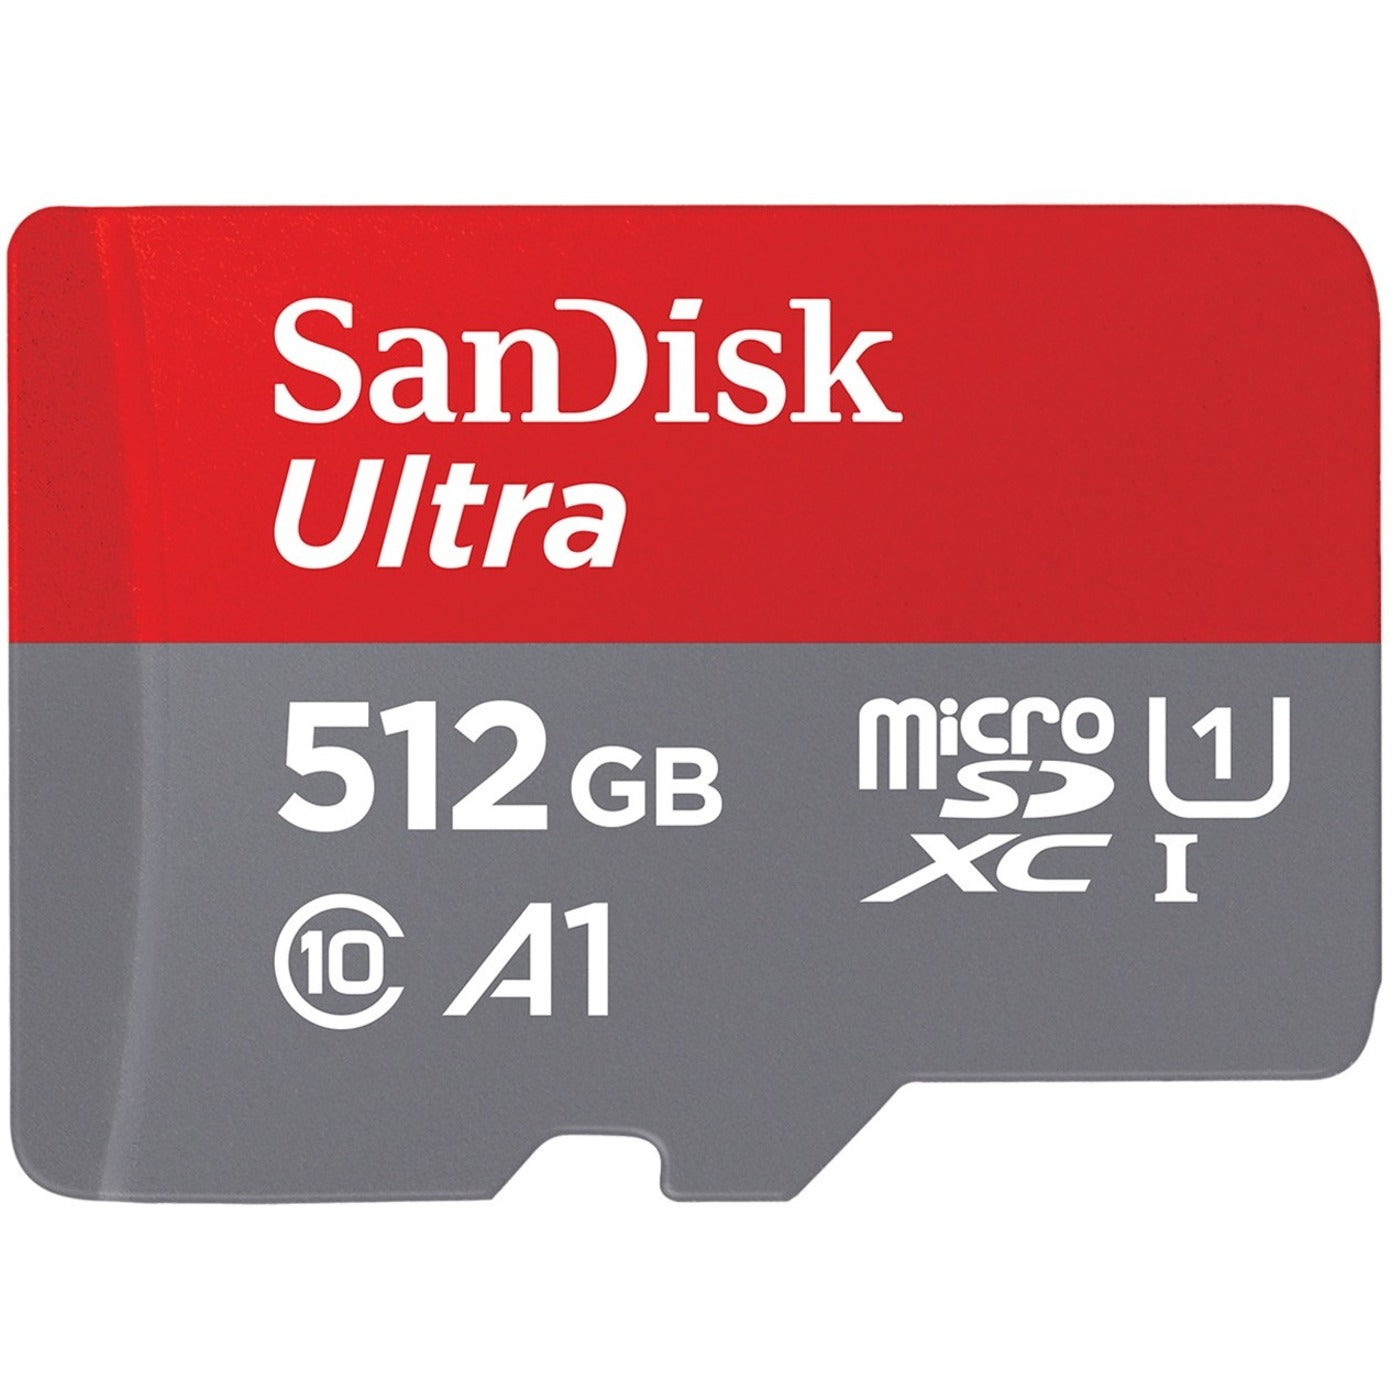 SanDisk SDSQUA4-512G-AN6MA Ultra microSDXC UHS-I Card with Adapter - 512GB, 10 Year Limited Warranty [Discontinued]